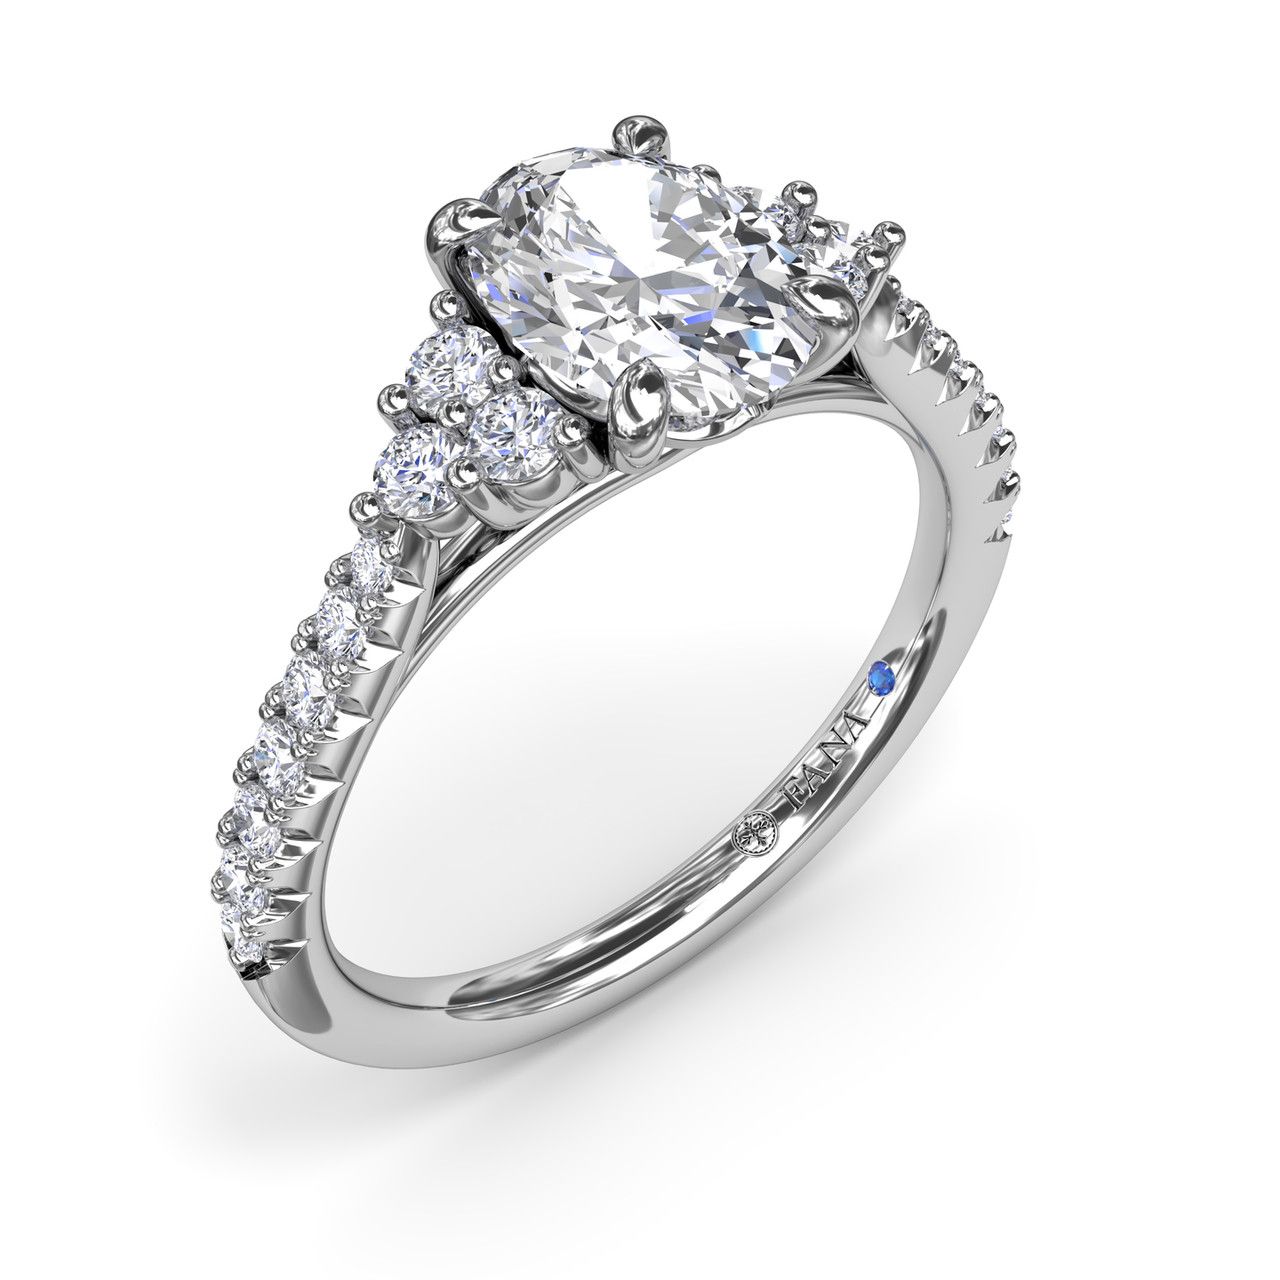 14K WHITE GOLD SEMI-MOUNT RING SIZE 6.5 WITH 20=0.37TW ROUND G-H VS2-SI1 DIAMONDS AND ONE ROUND BLUE SAPPHIRE   (3.07 GRAMS)